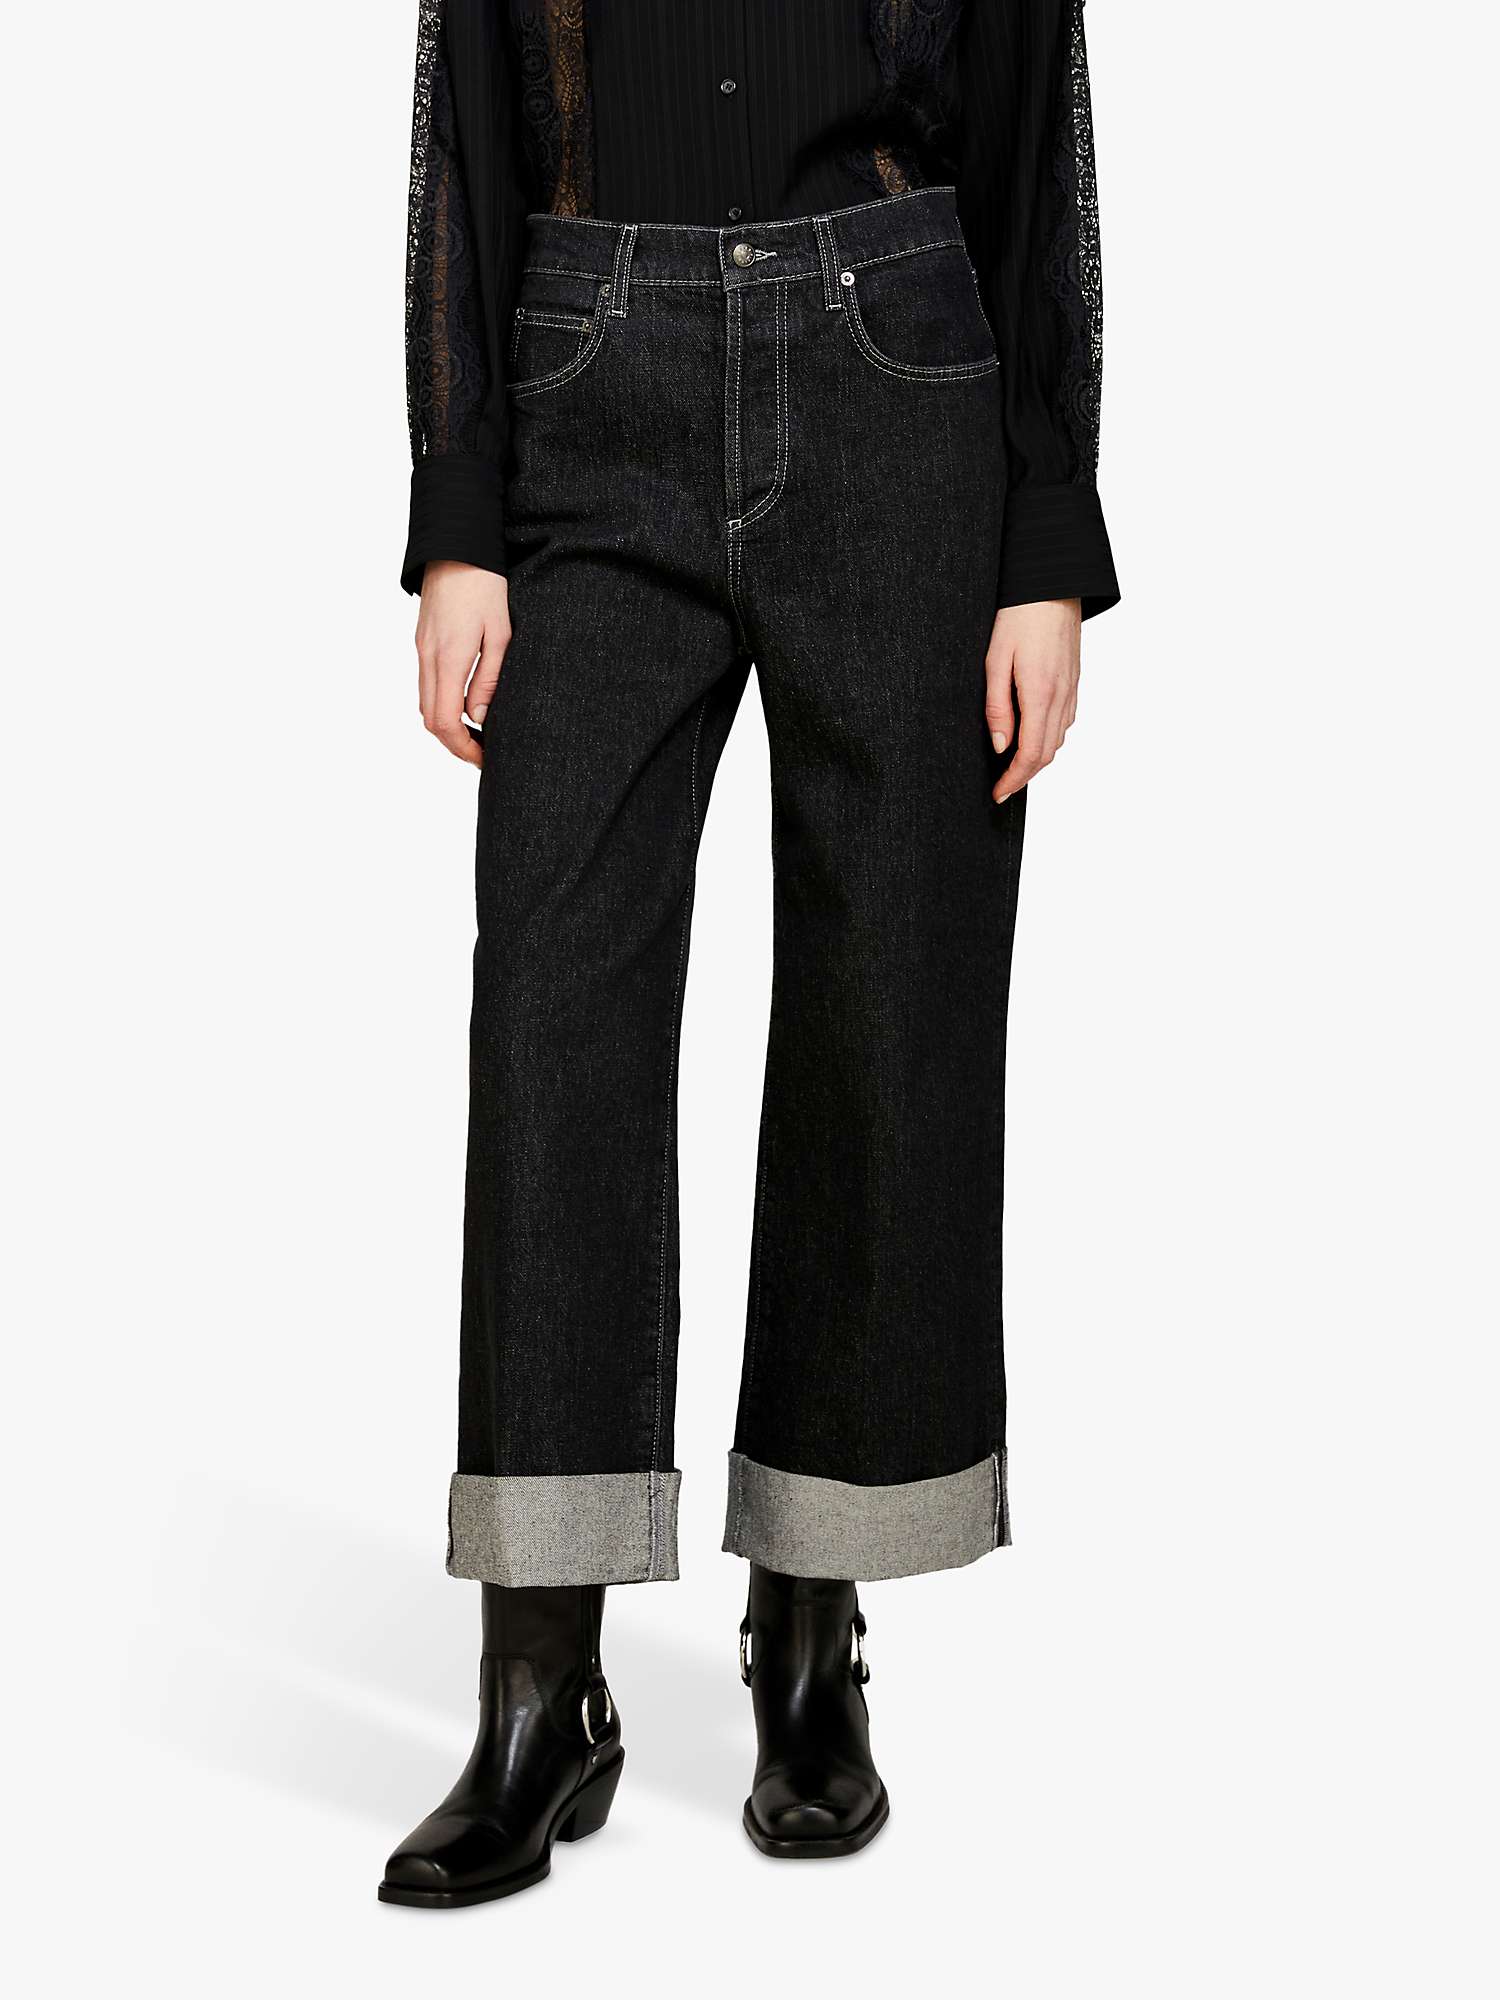 Buy SISLEY Baggy Fit Cuff Jeans, Black Online at johnlewis.com